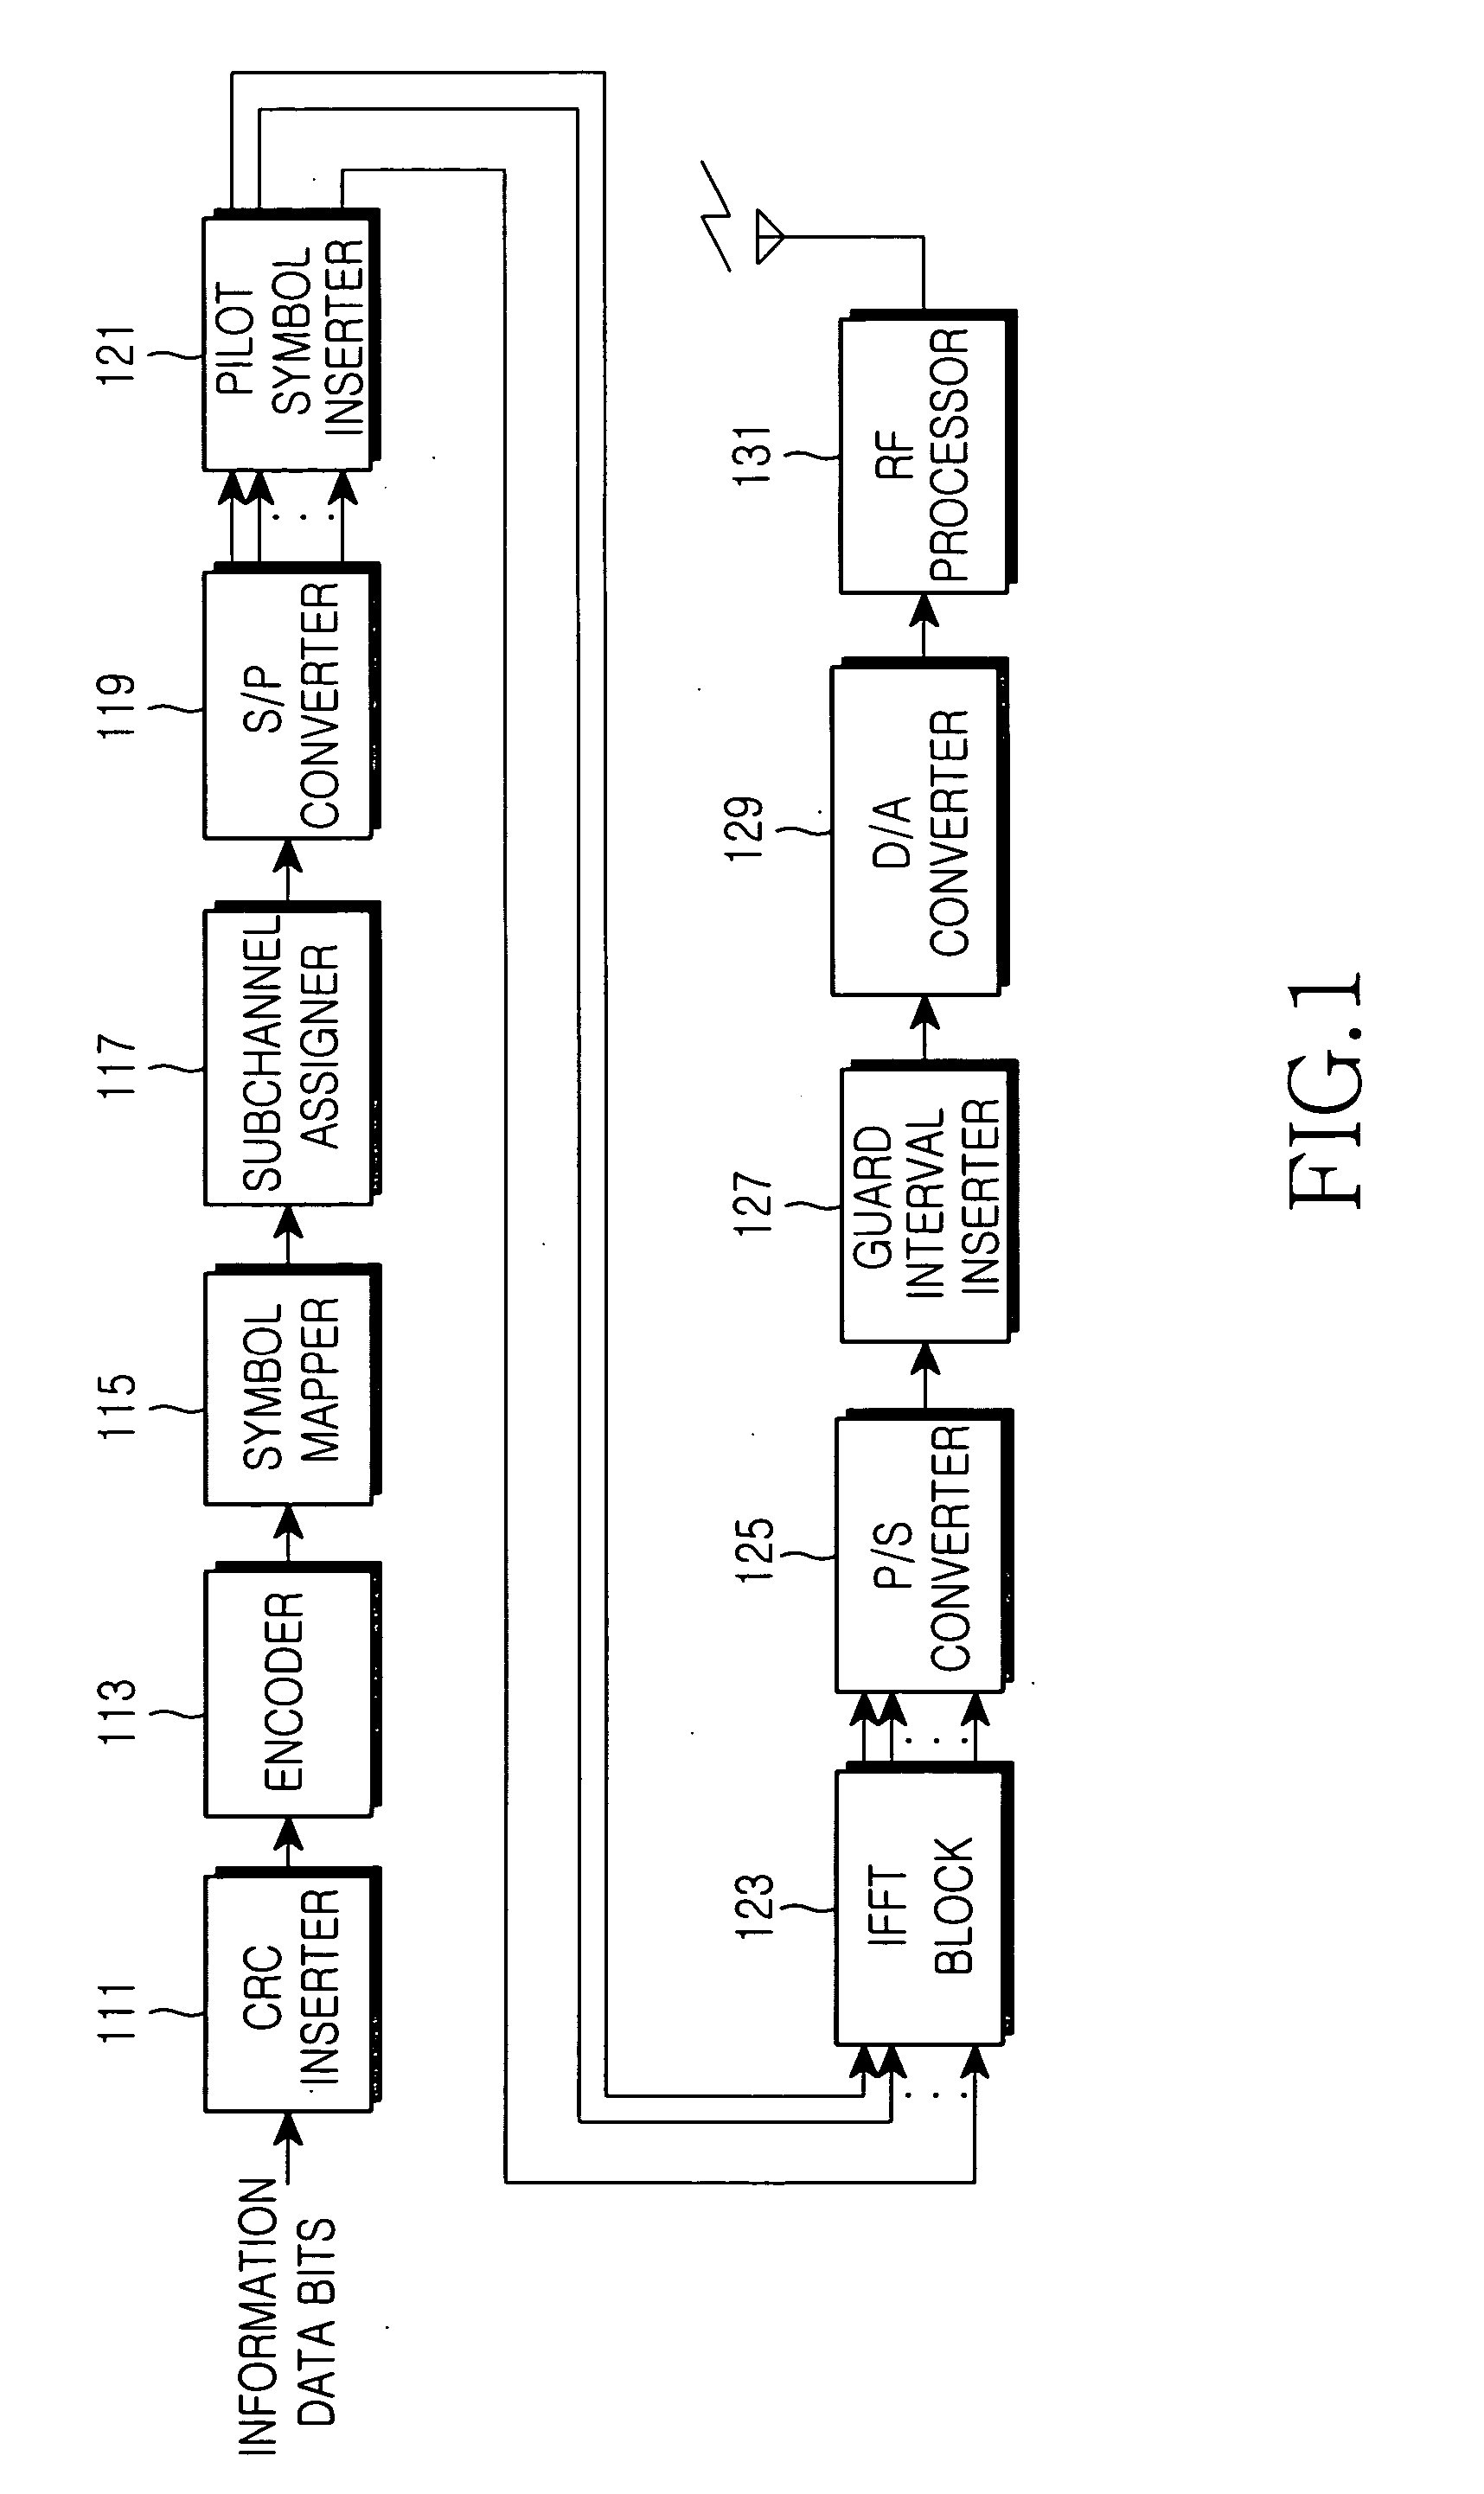 Apparatus and method for assigning subchannels in an OFDMA communication system